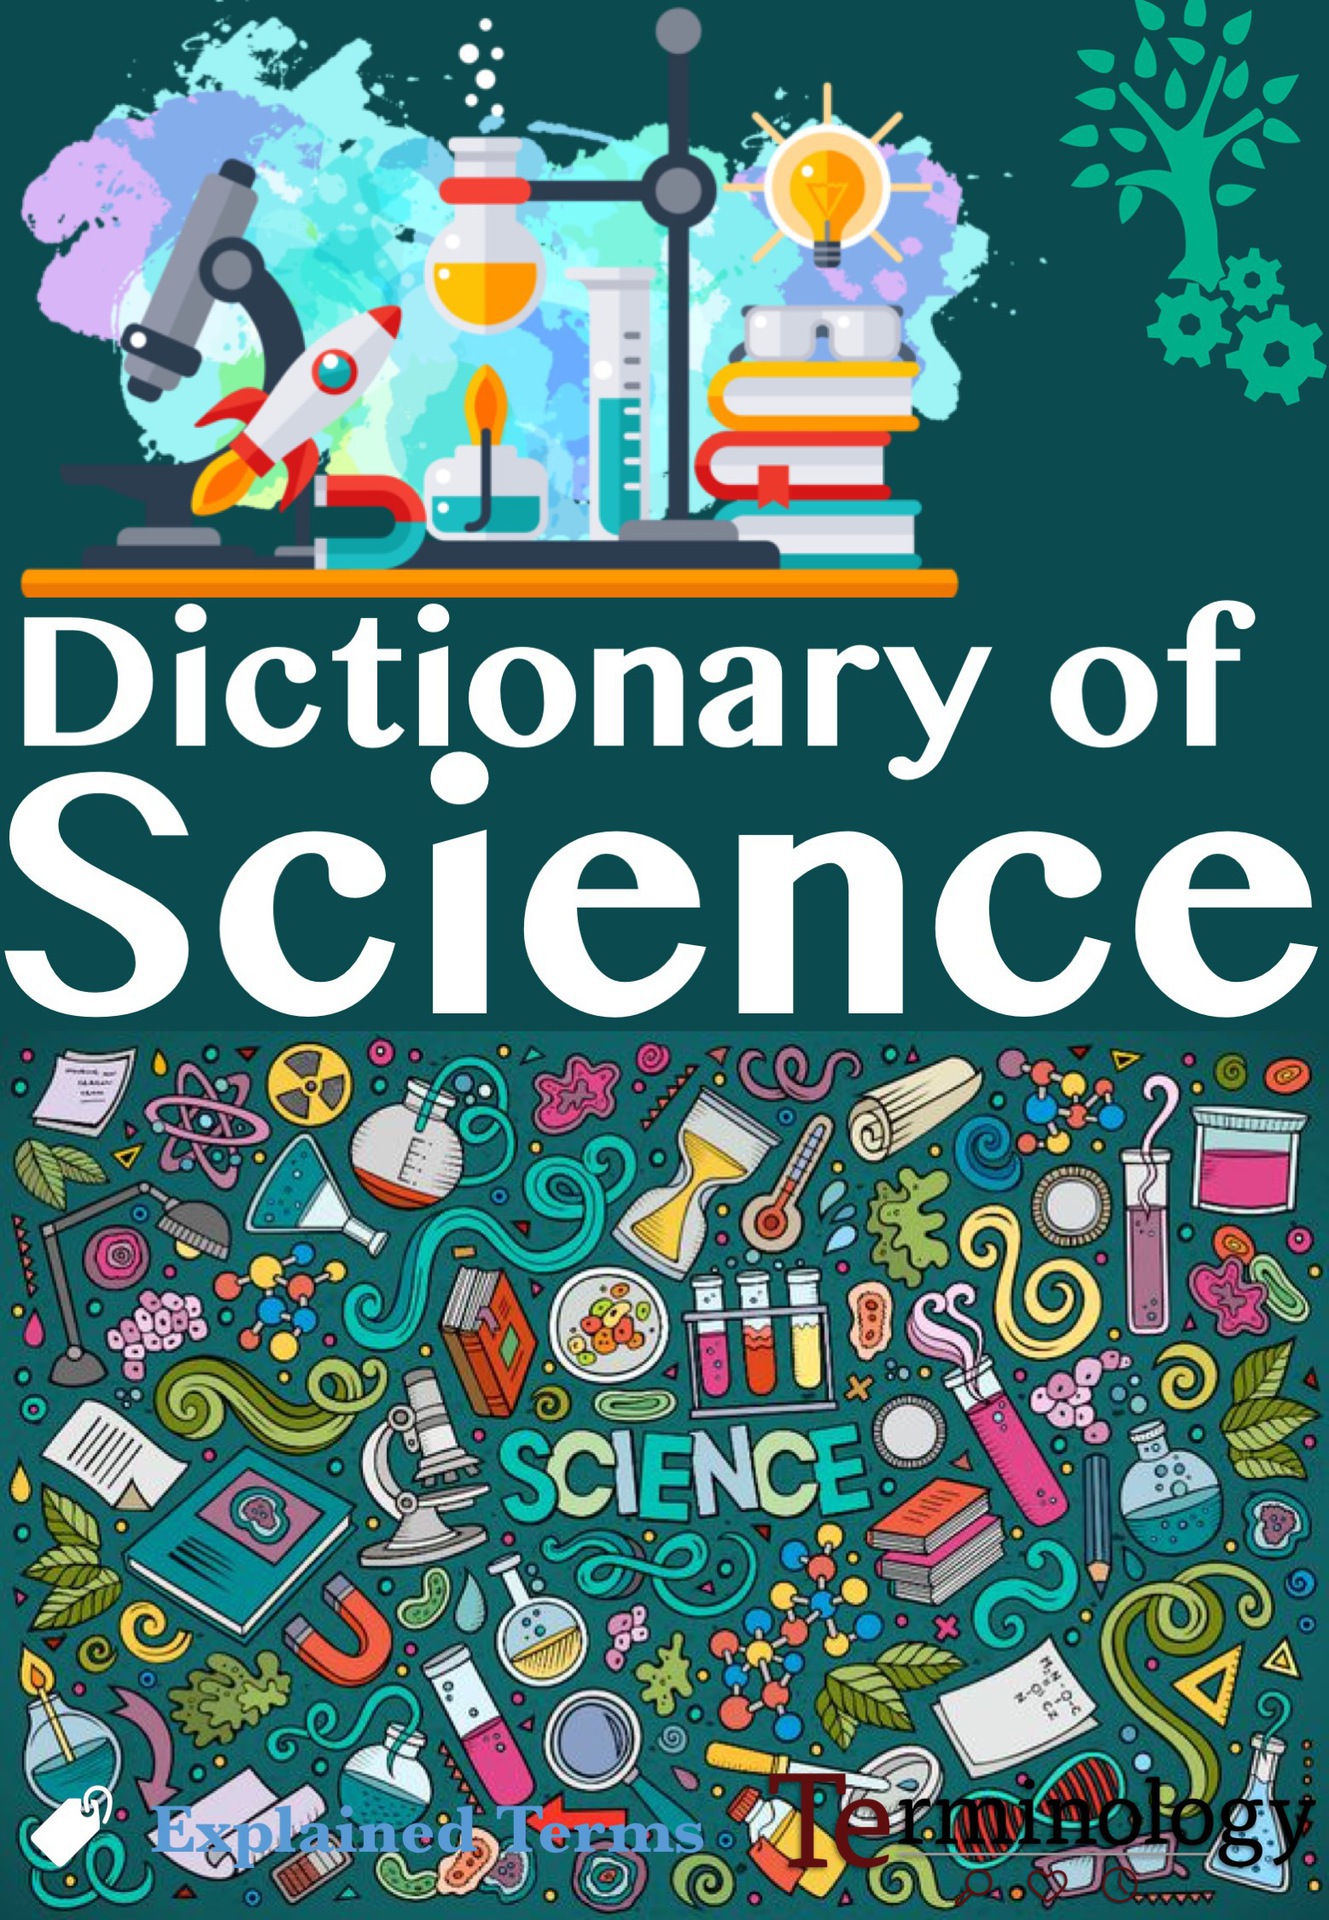 Dictionary of Science Terms